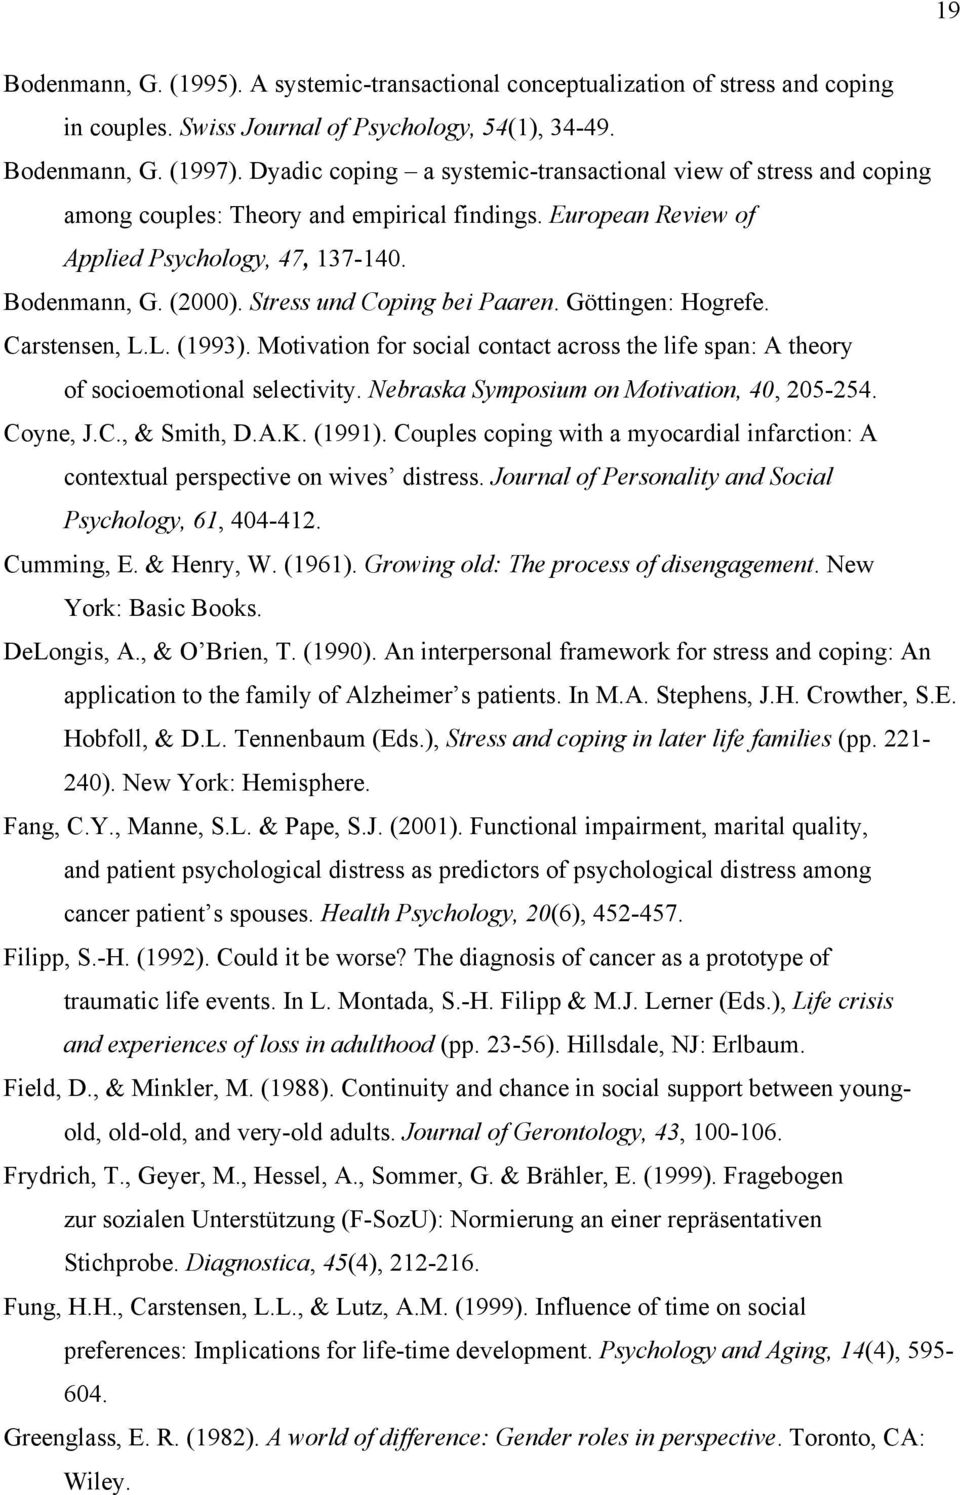 Stress und Coping bei Paaren. Göttingen: Hogrefe. Carstensen, L.L. (1993). Motivation for social contact across the life span: A theory of socioemotional selectivity.